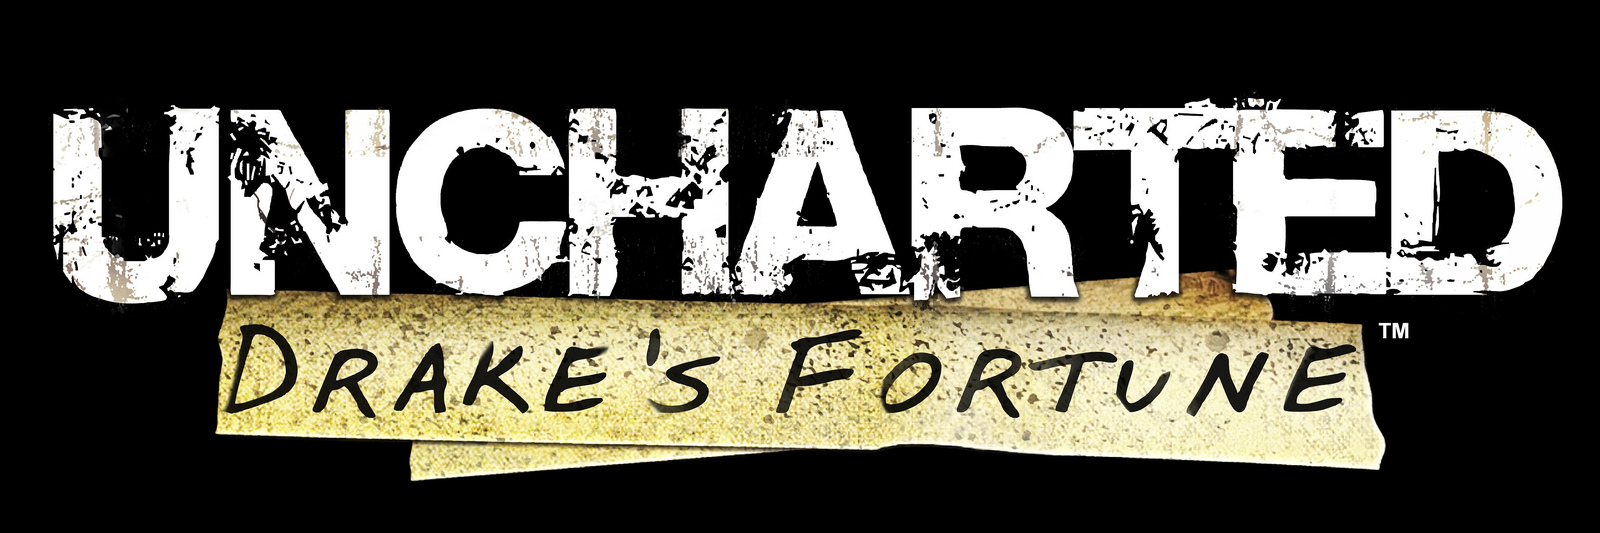 Uncharted: Drake's Fortune (PS4) - Review